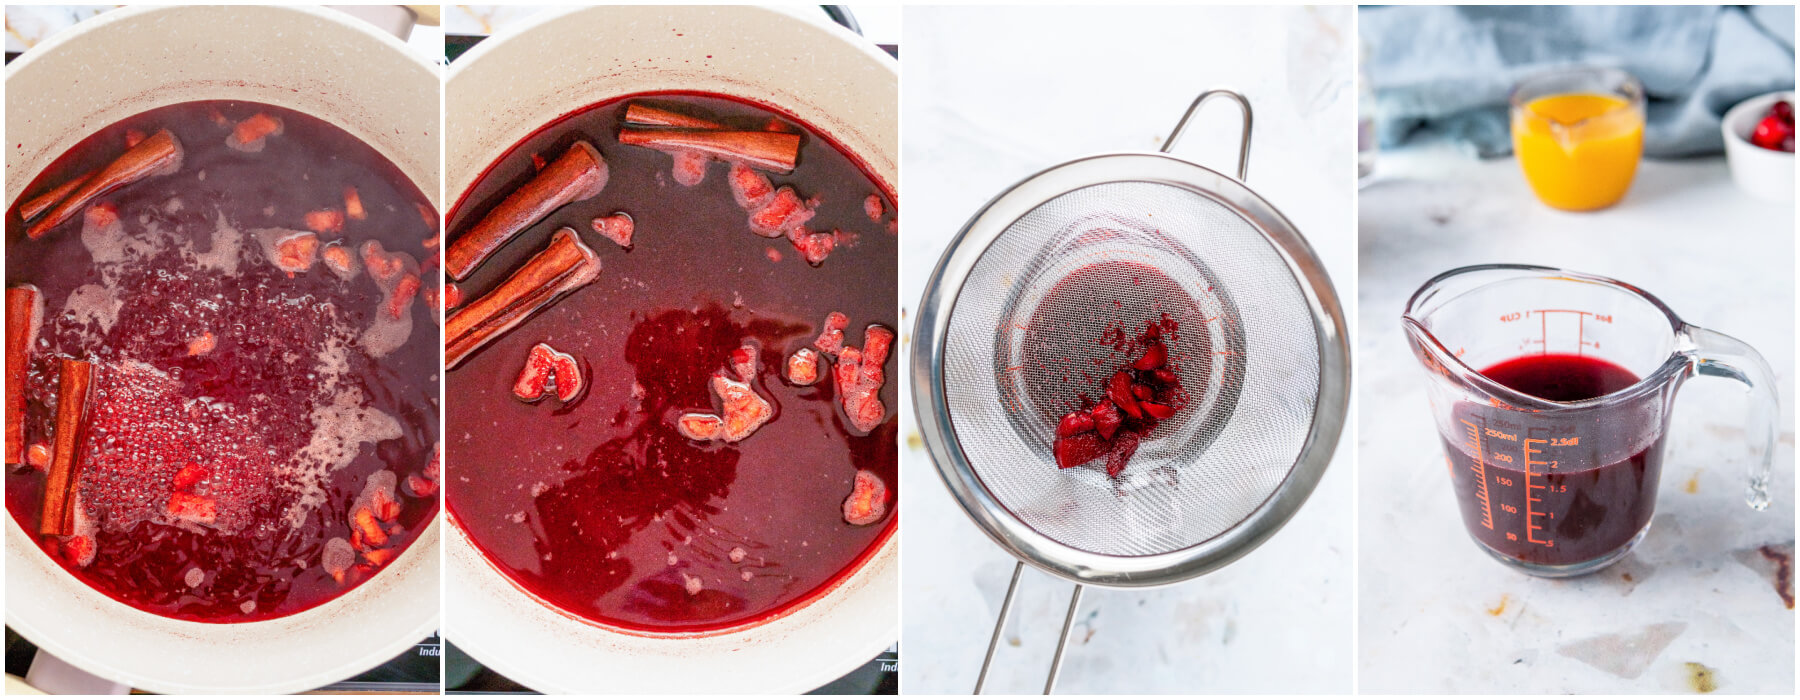 Process images showing how to make mulled cranberry juice with mulling spices.